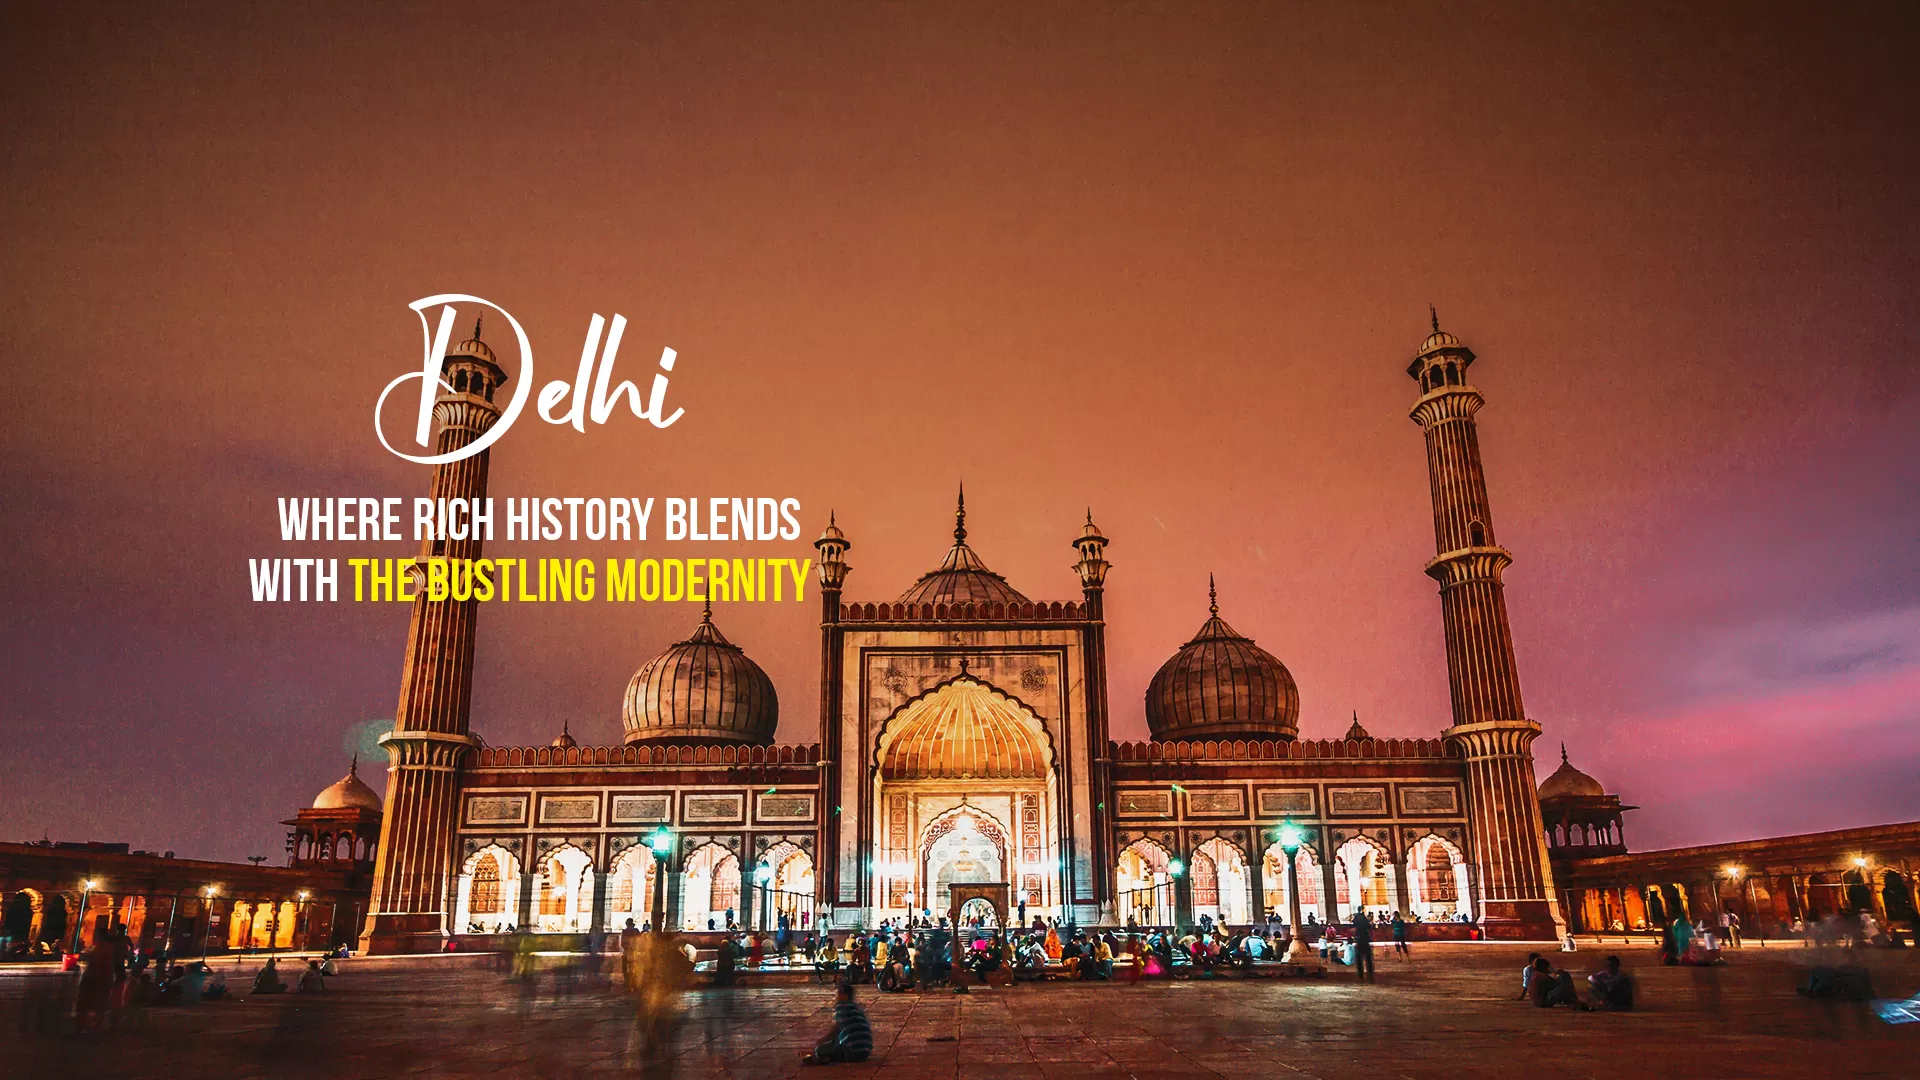 uk tour packages from delhi